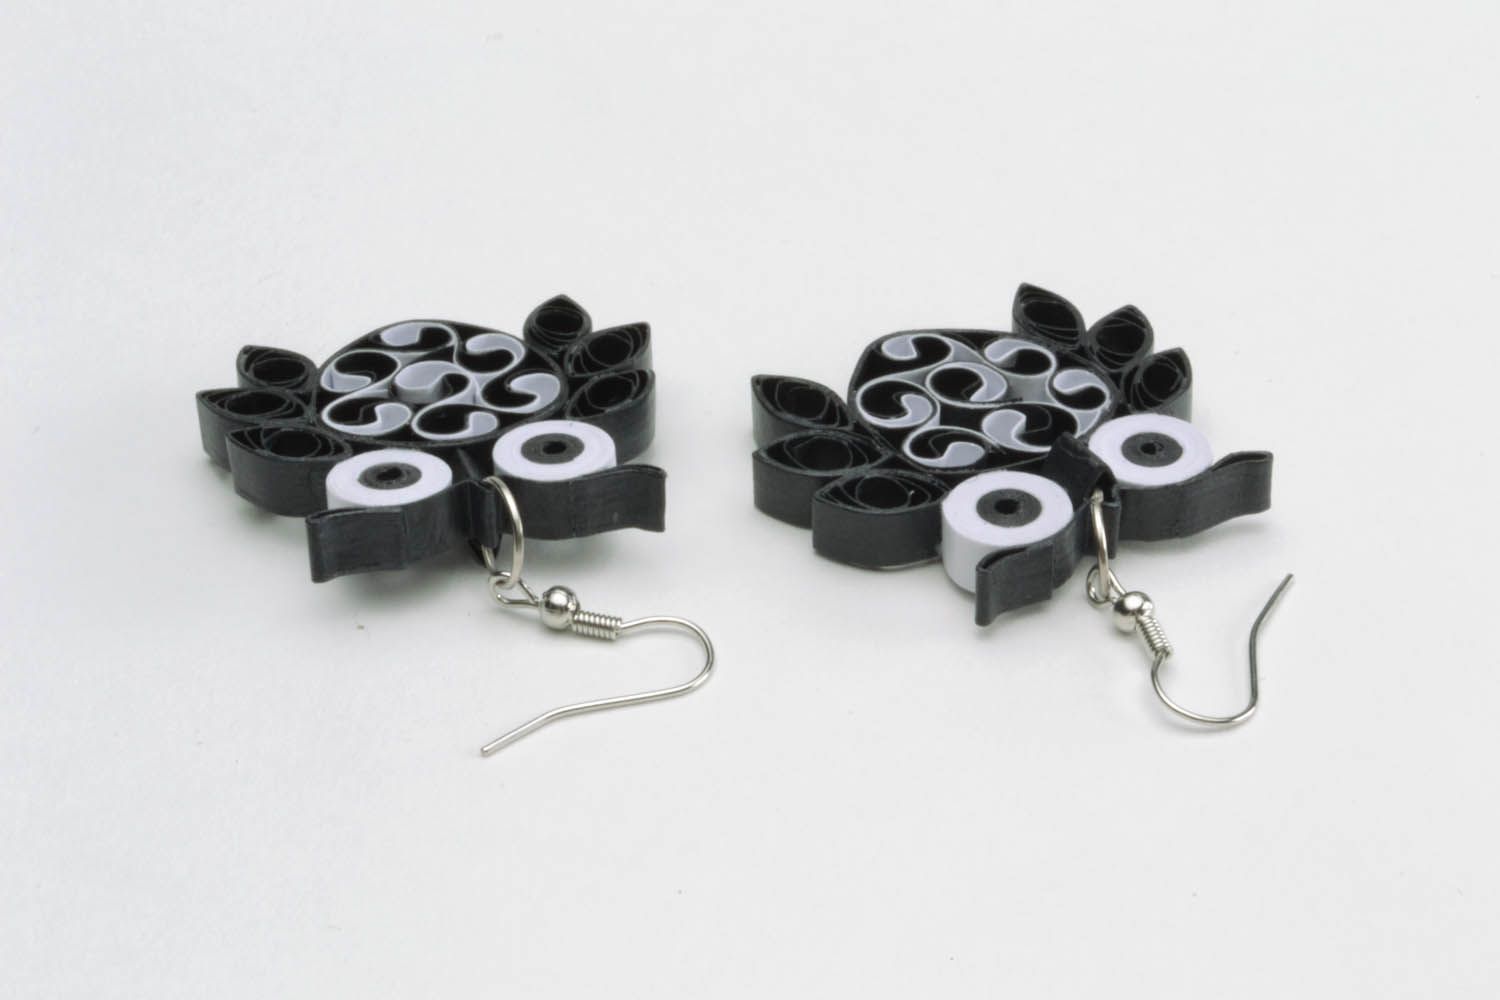 Earrings made using quilling technique photo 3